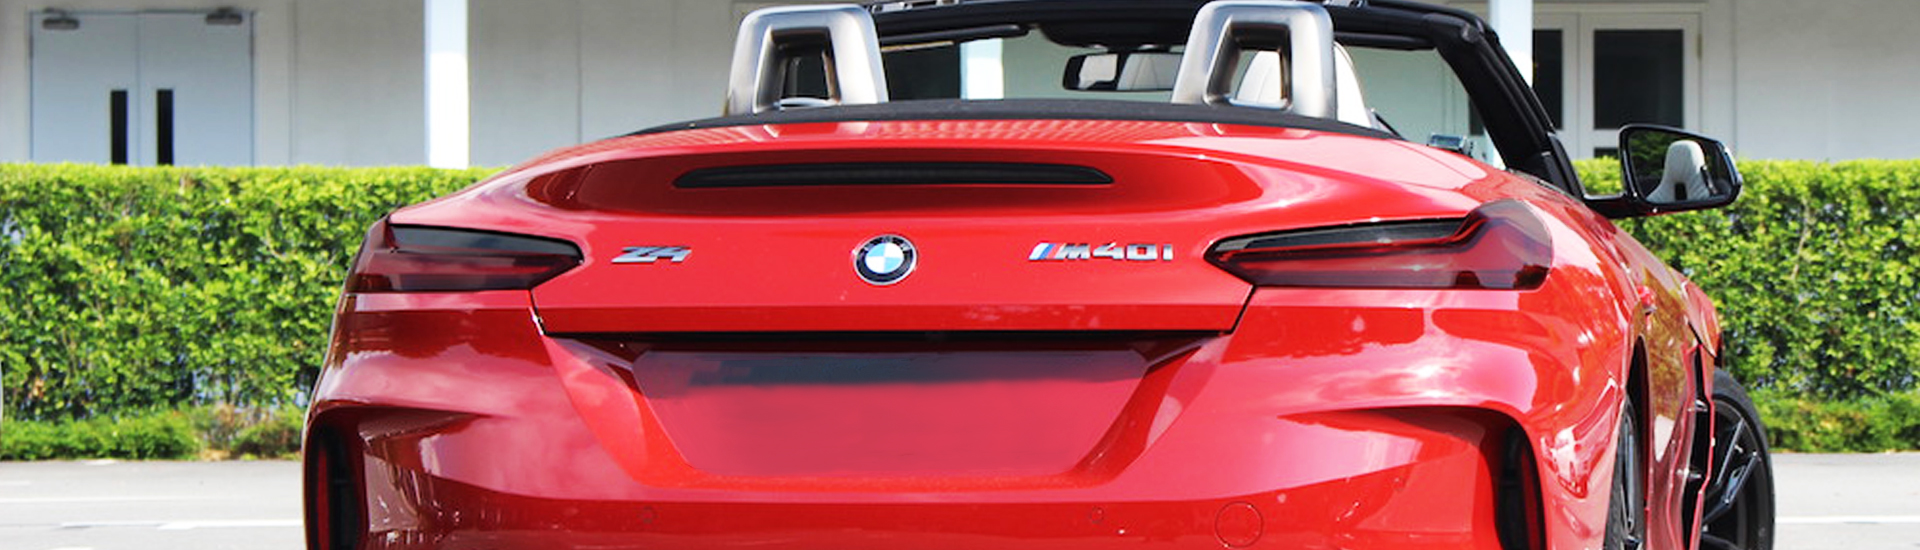 BMW Z4 Tail Light Tint Covers